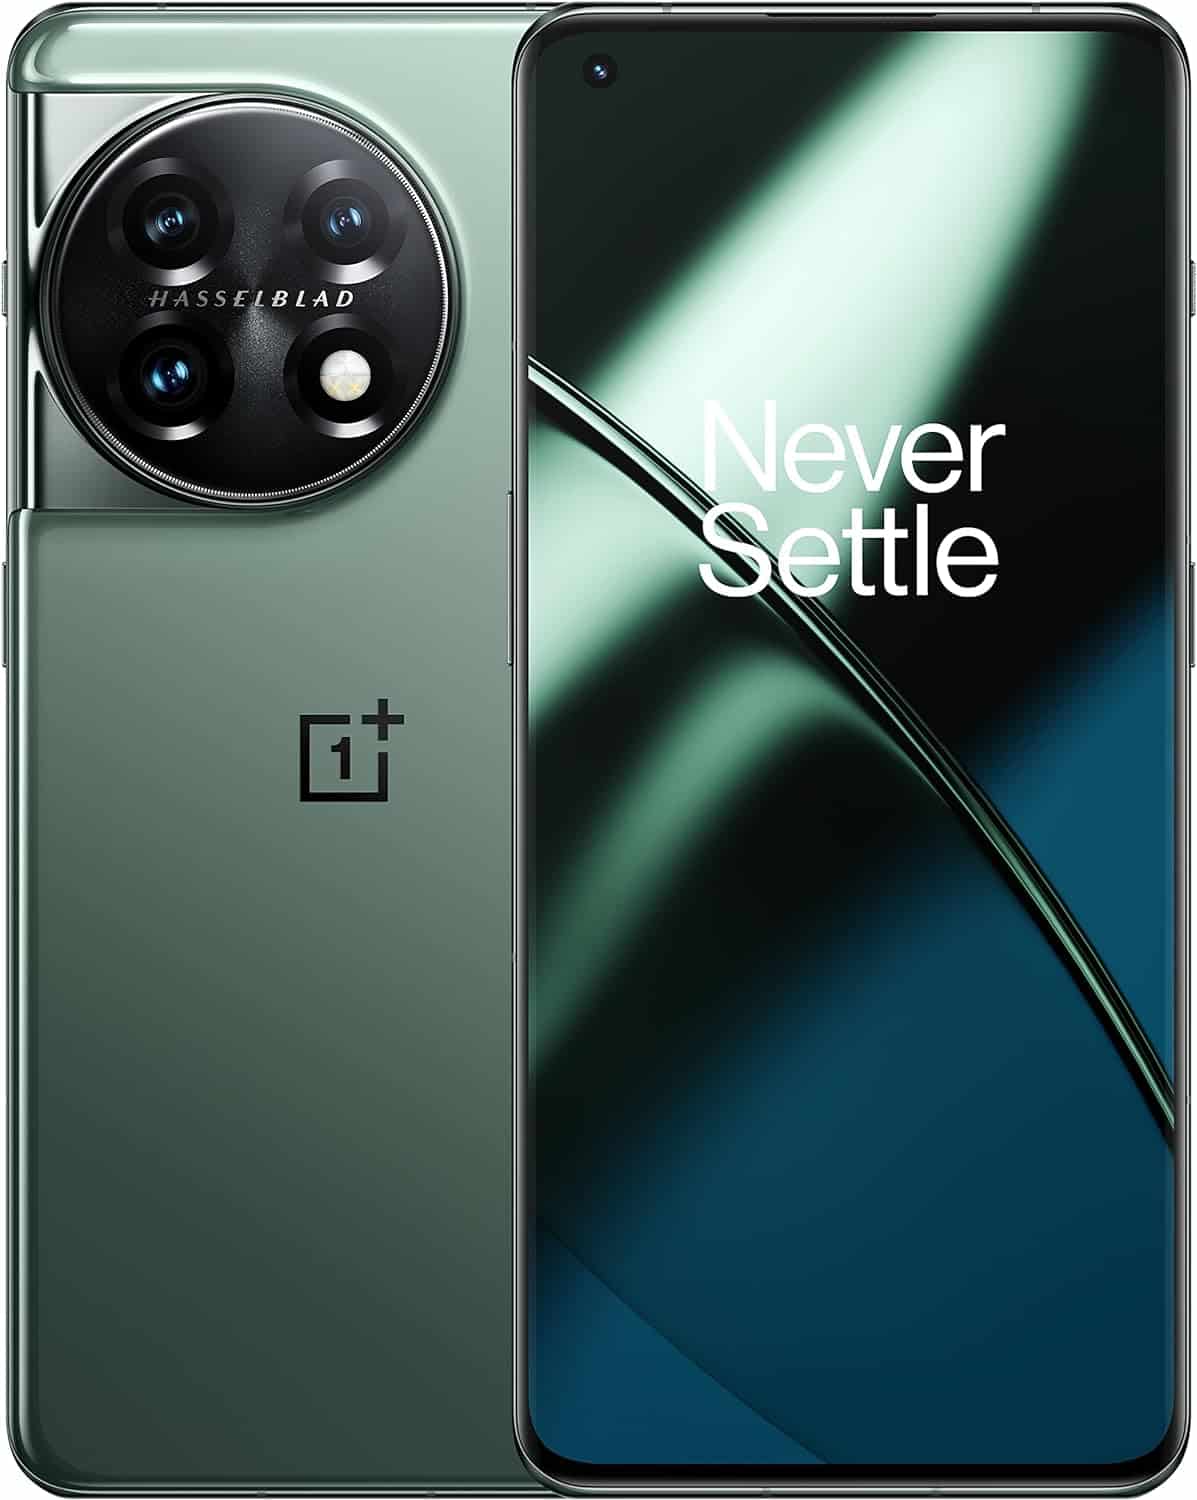 OnePlus 6t 64gb - never settle.